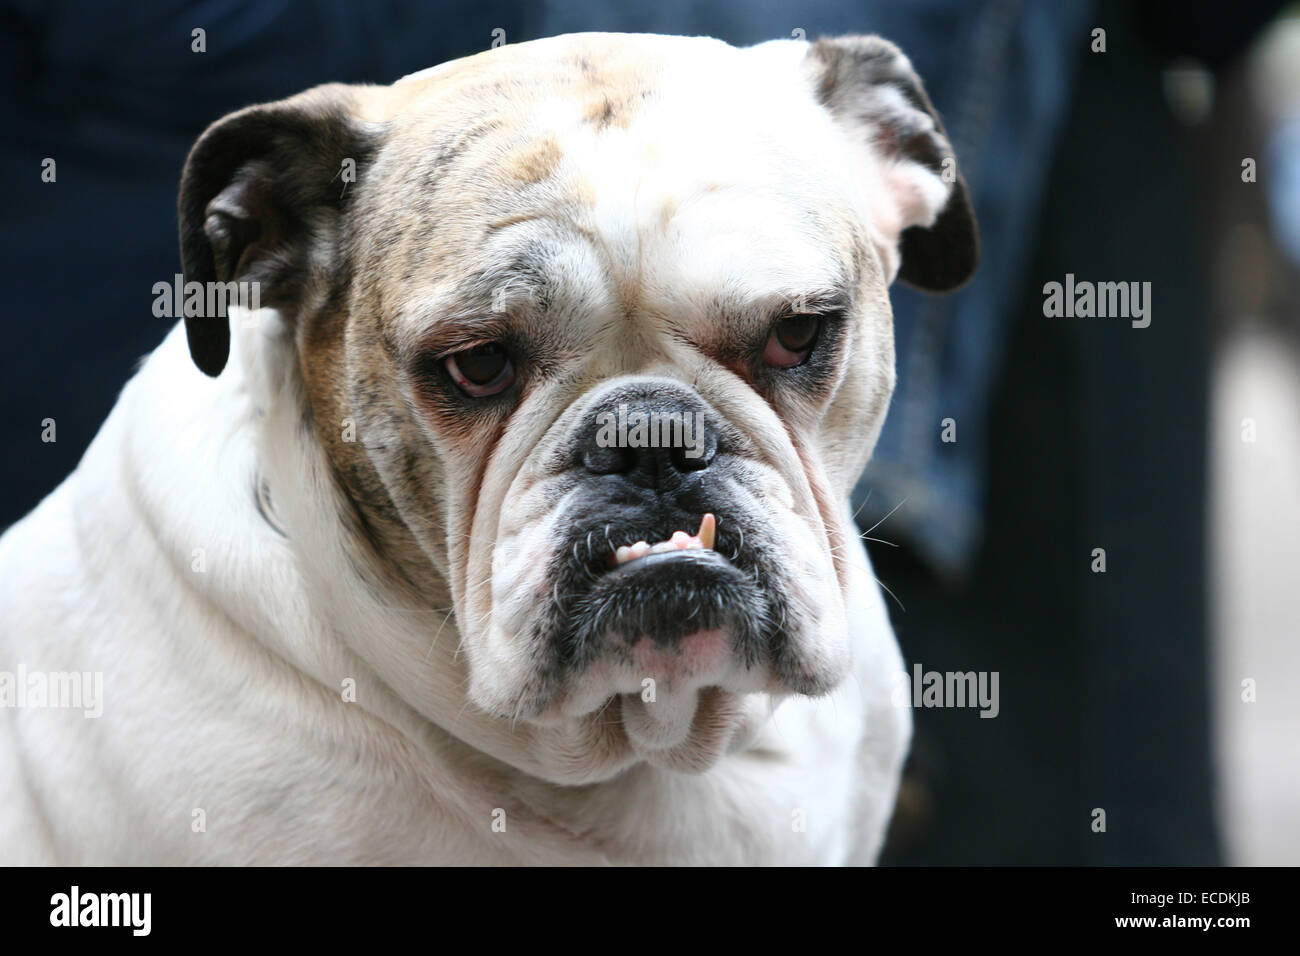 A close up of an old bulldog with visible canines. Stock Photo